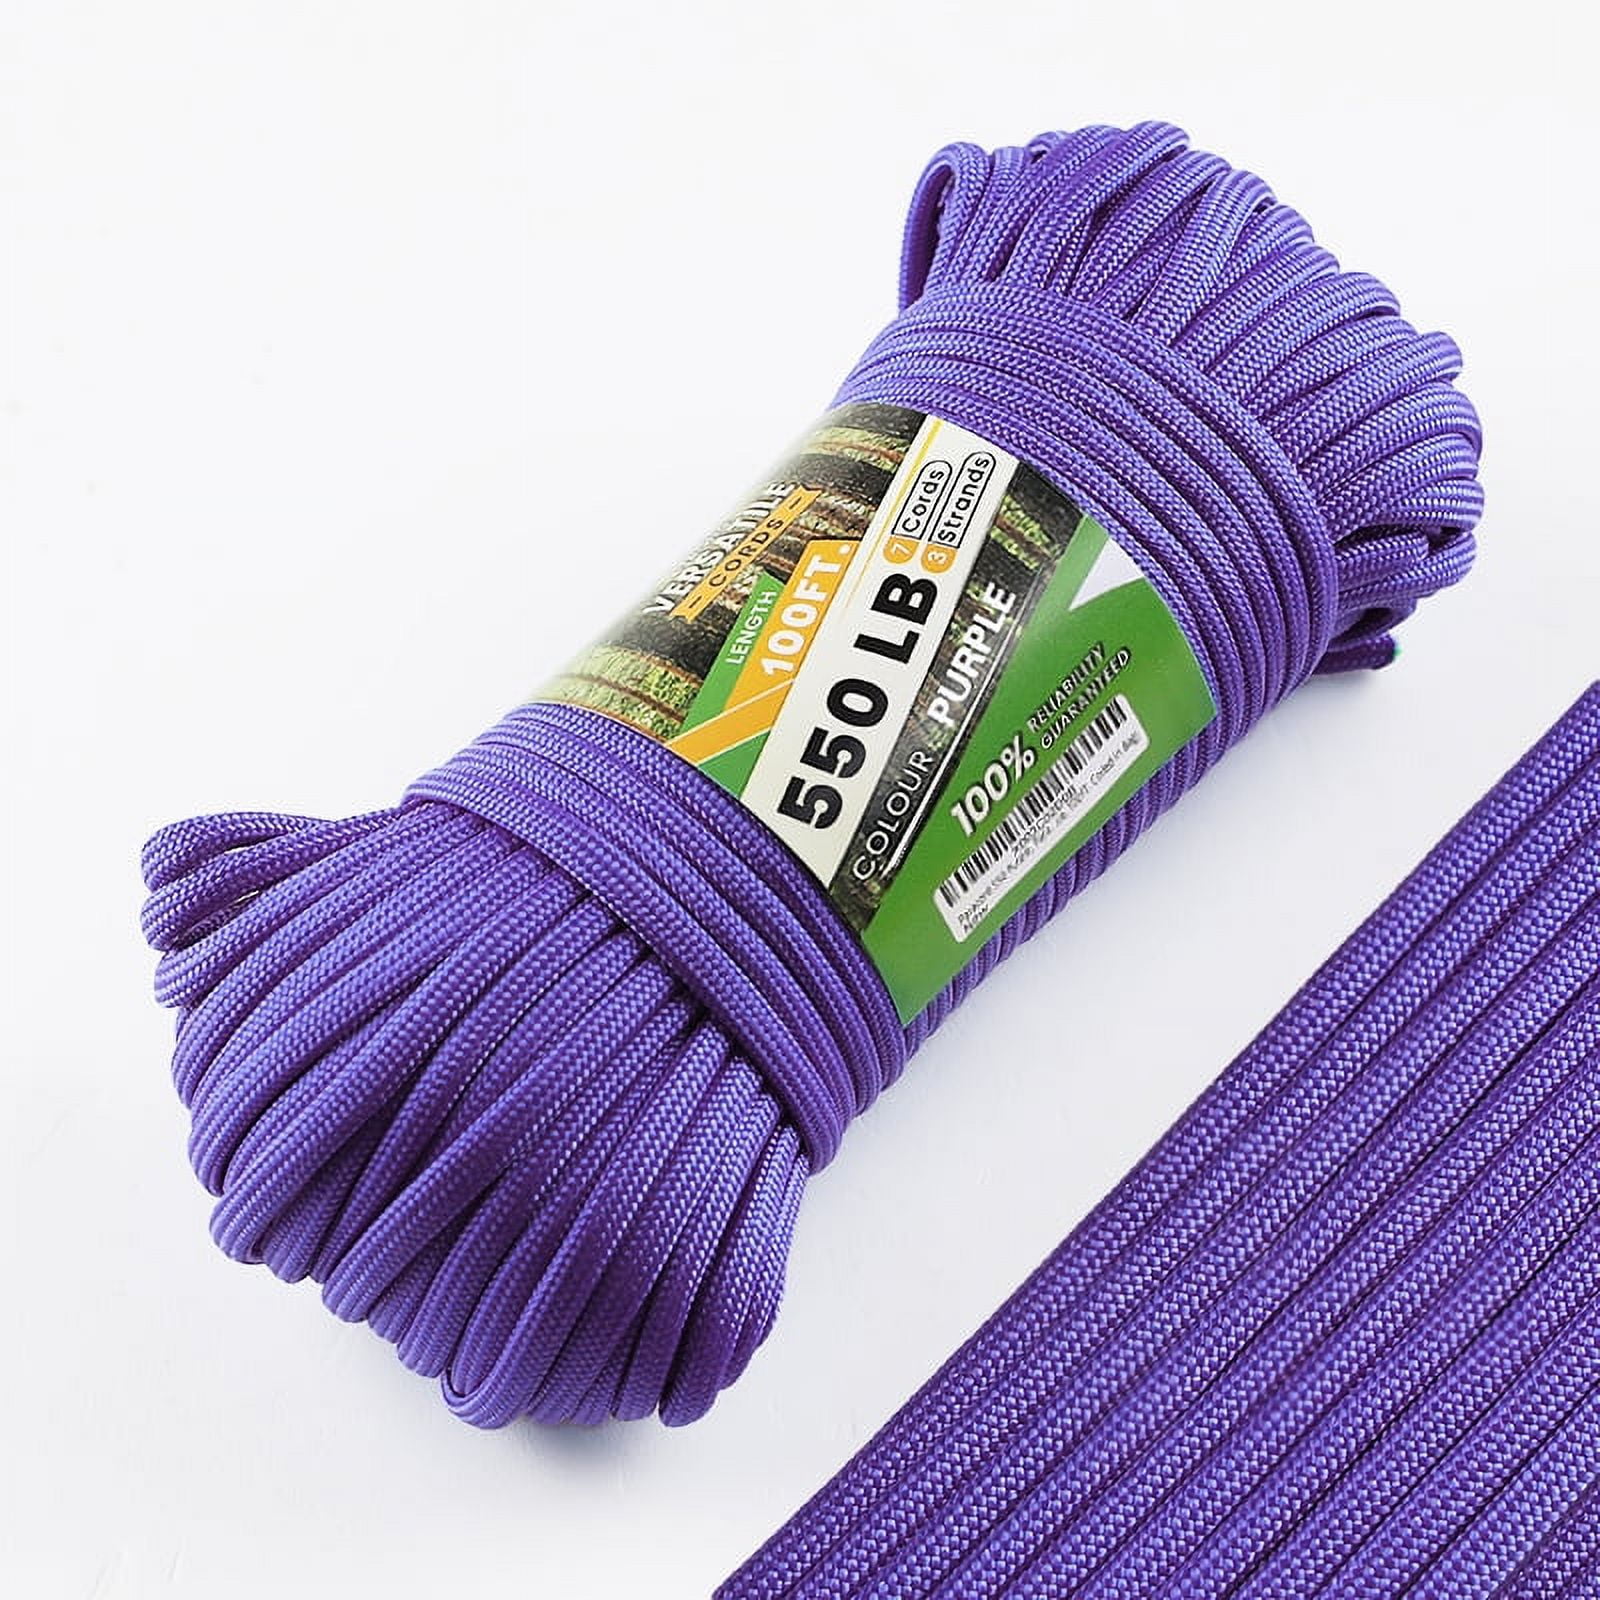 Purple Paracord 550, Parachute Cord Mil-Spec 100FT, 100% Nylon Rope in  Survival Gear and Equipment, Heavy Duty Rope for Bracelet, Leashes,  Lanyards and Camping (Blue, 100FT. COILED IN BAG) 